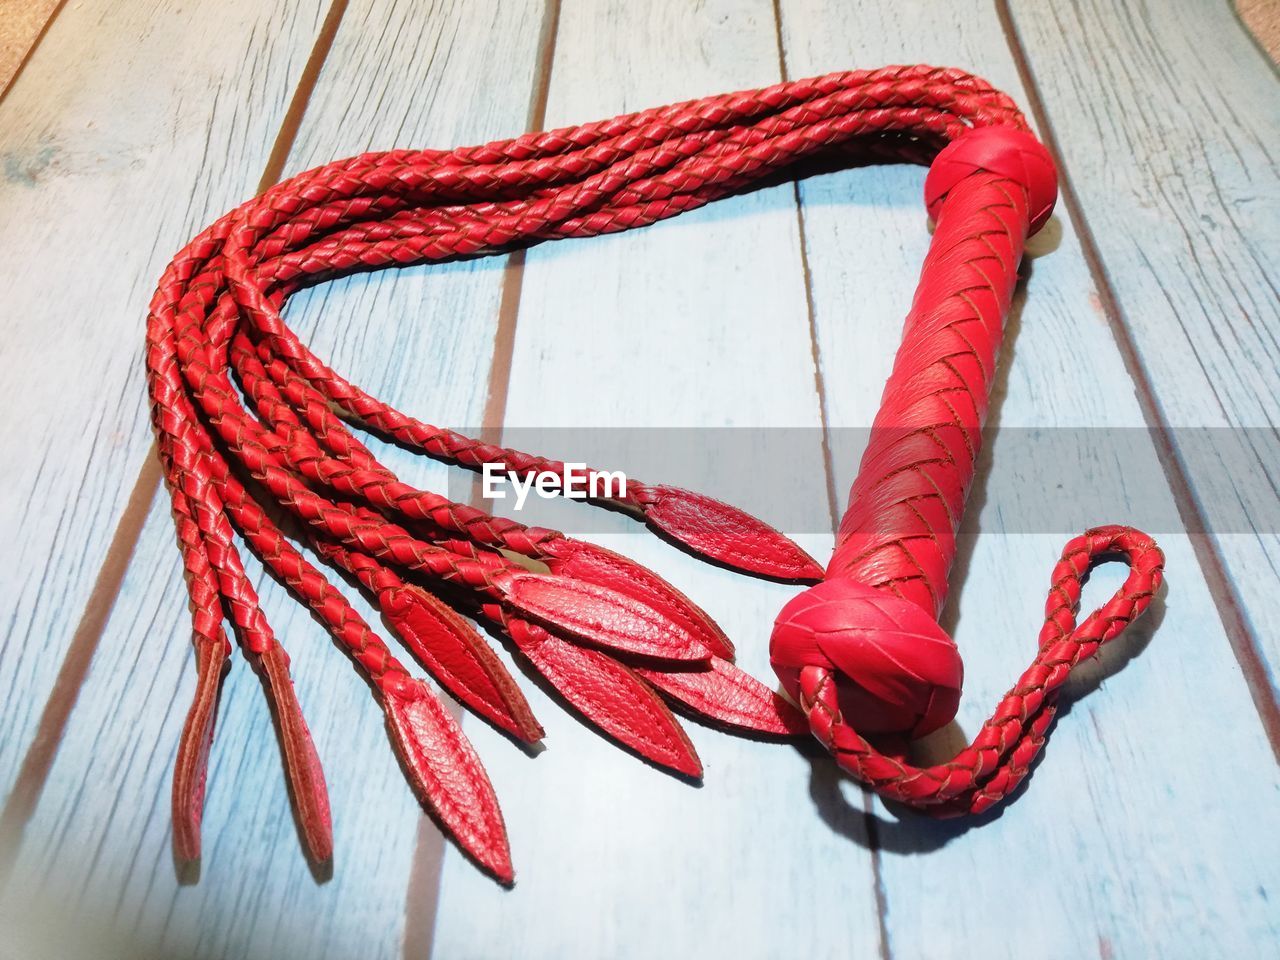 HIGH ANGLE VIEW OF RED ROPE TIED ON TABLE